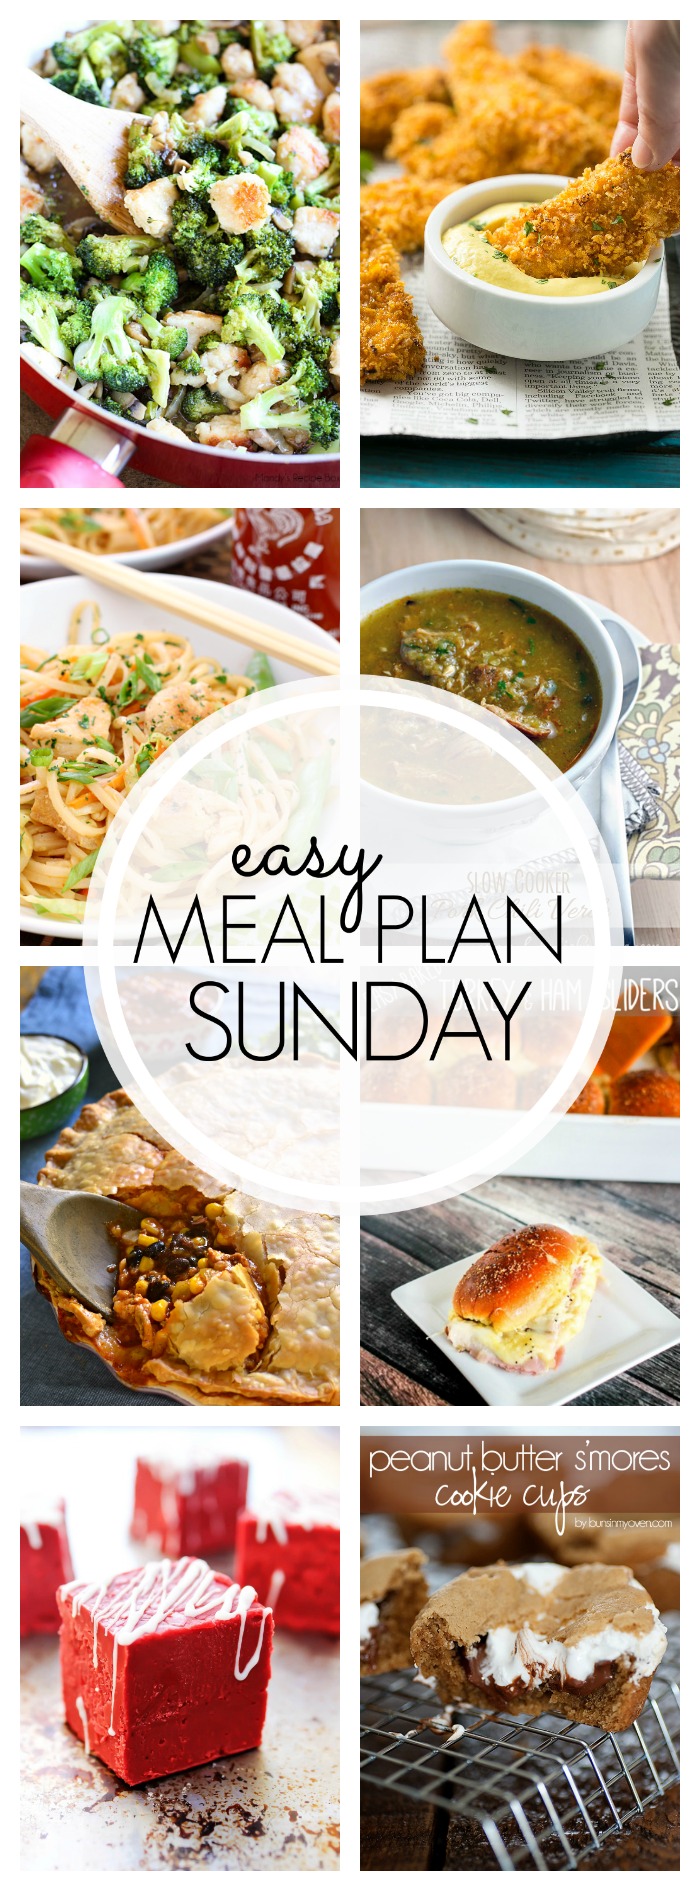 Easy Meal Plan Sunday #71